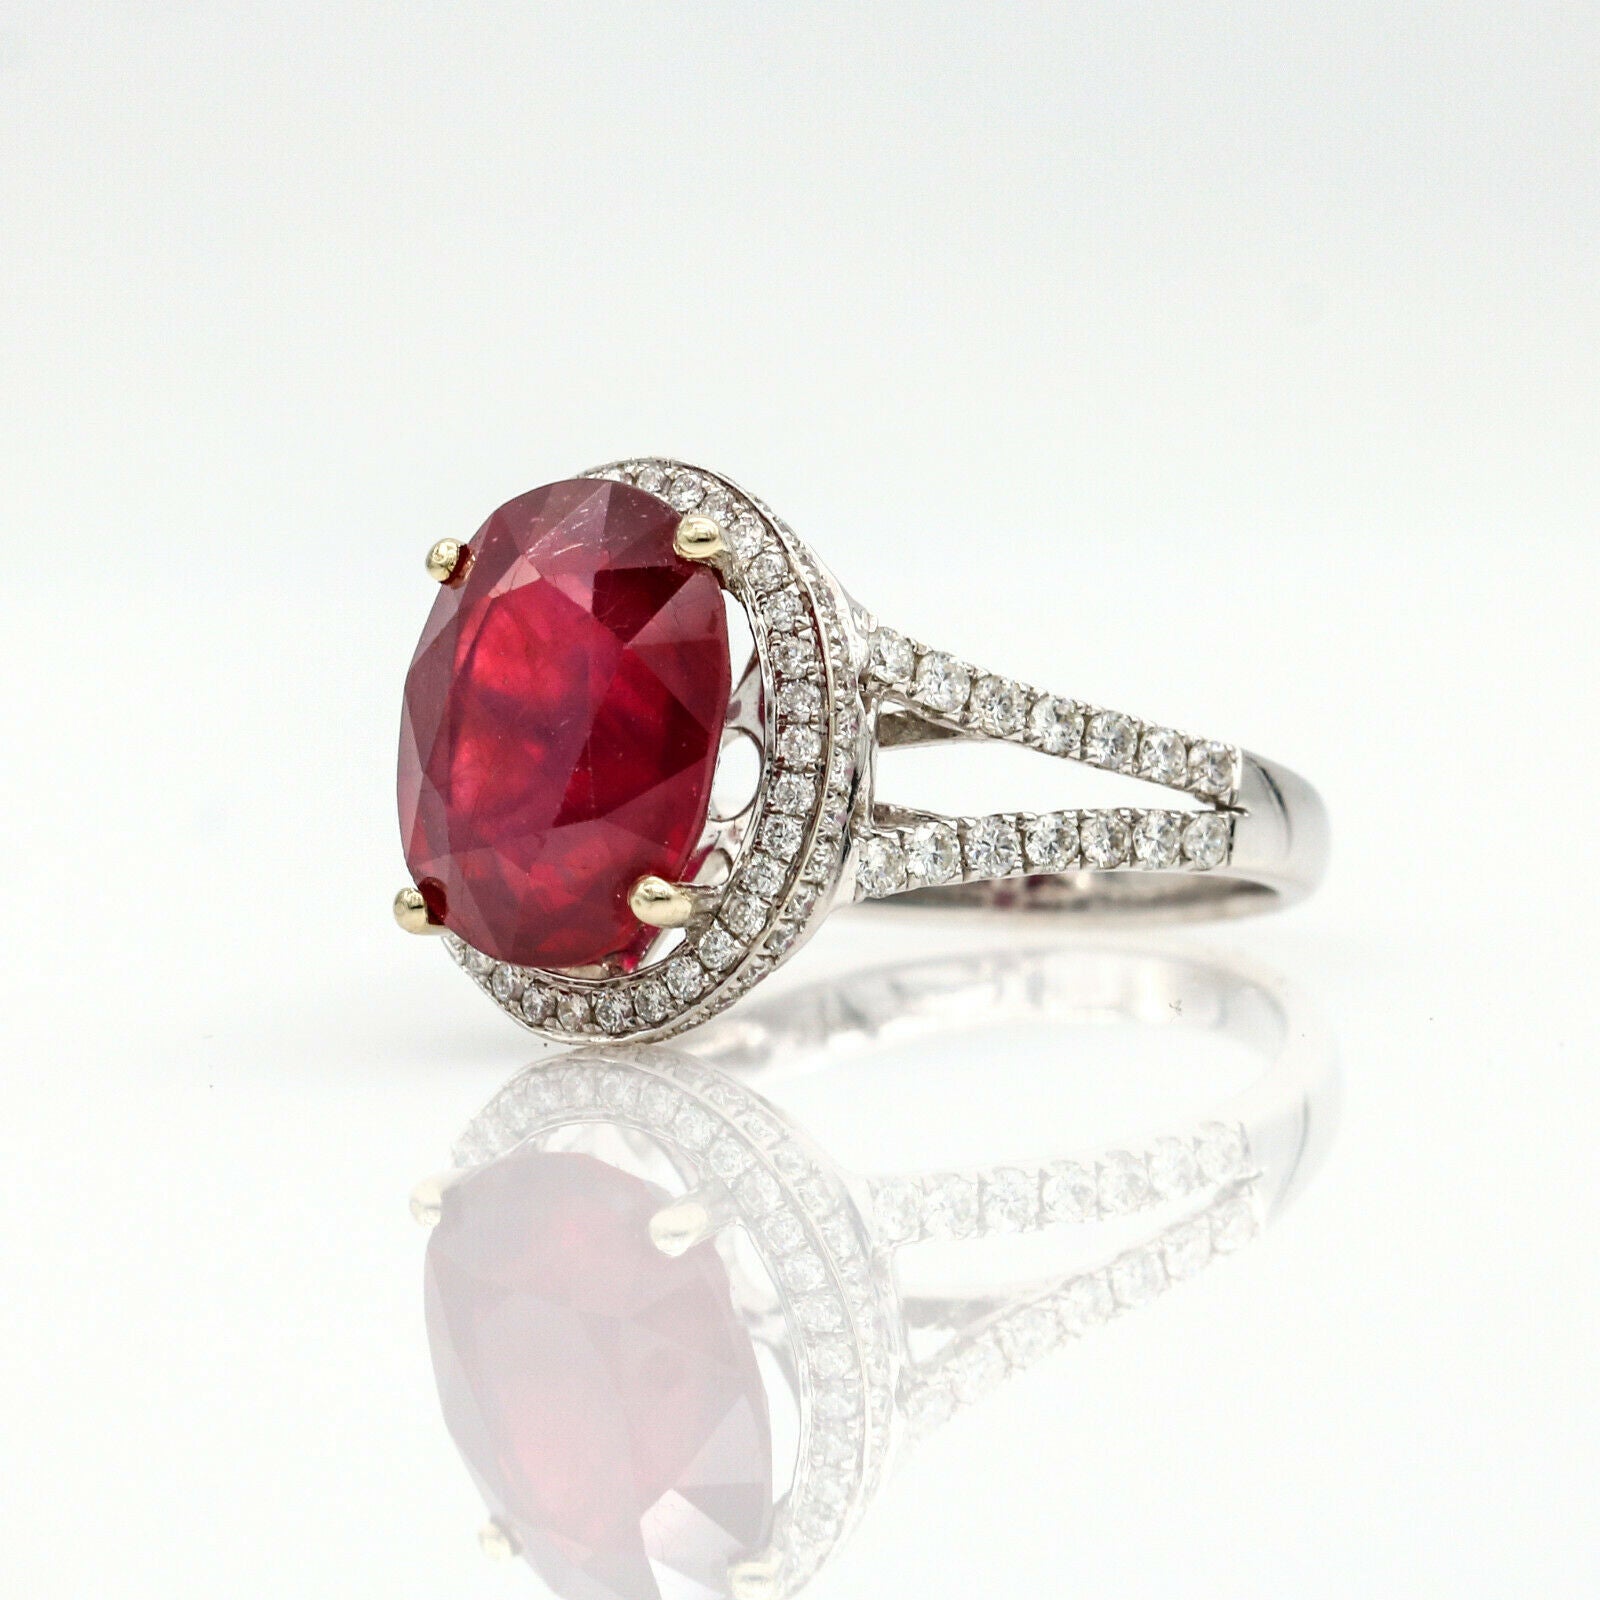 6.26 ct Ruby and Diamond Halo Engagement Ring in 18k White Gold